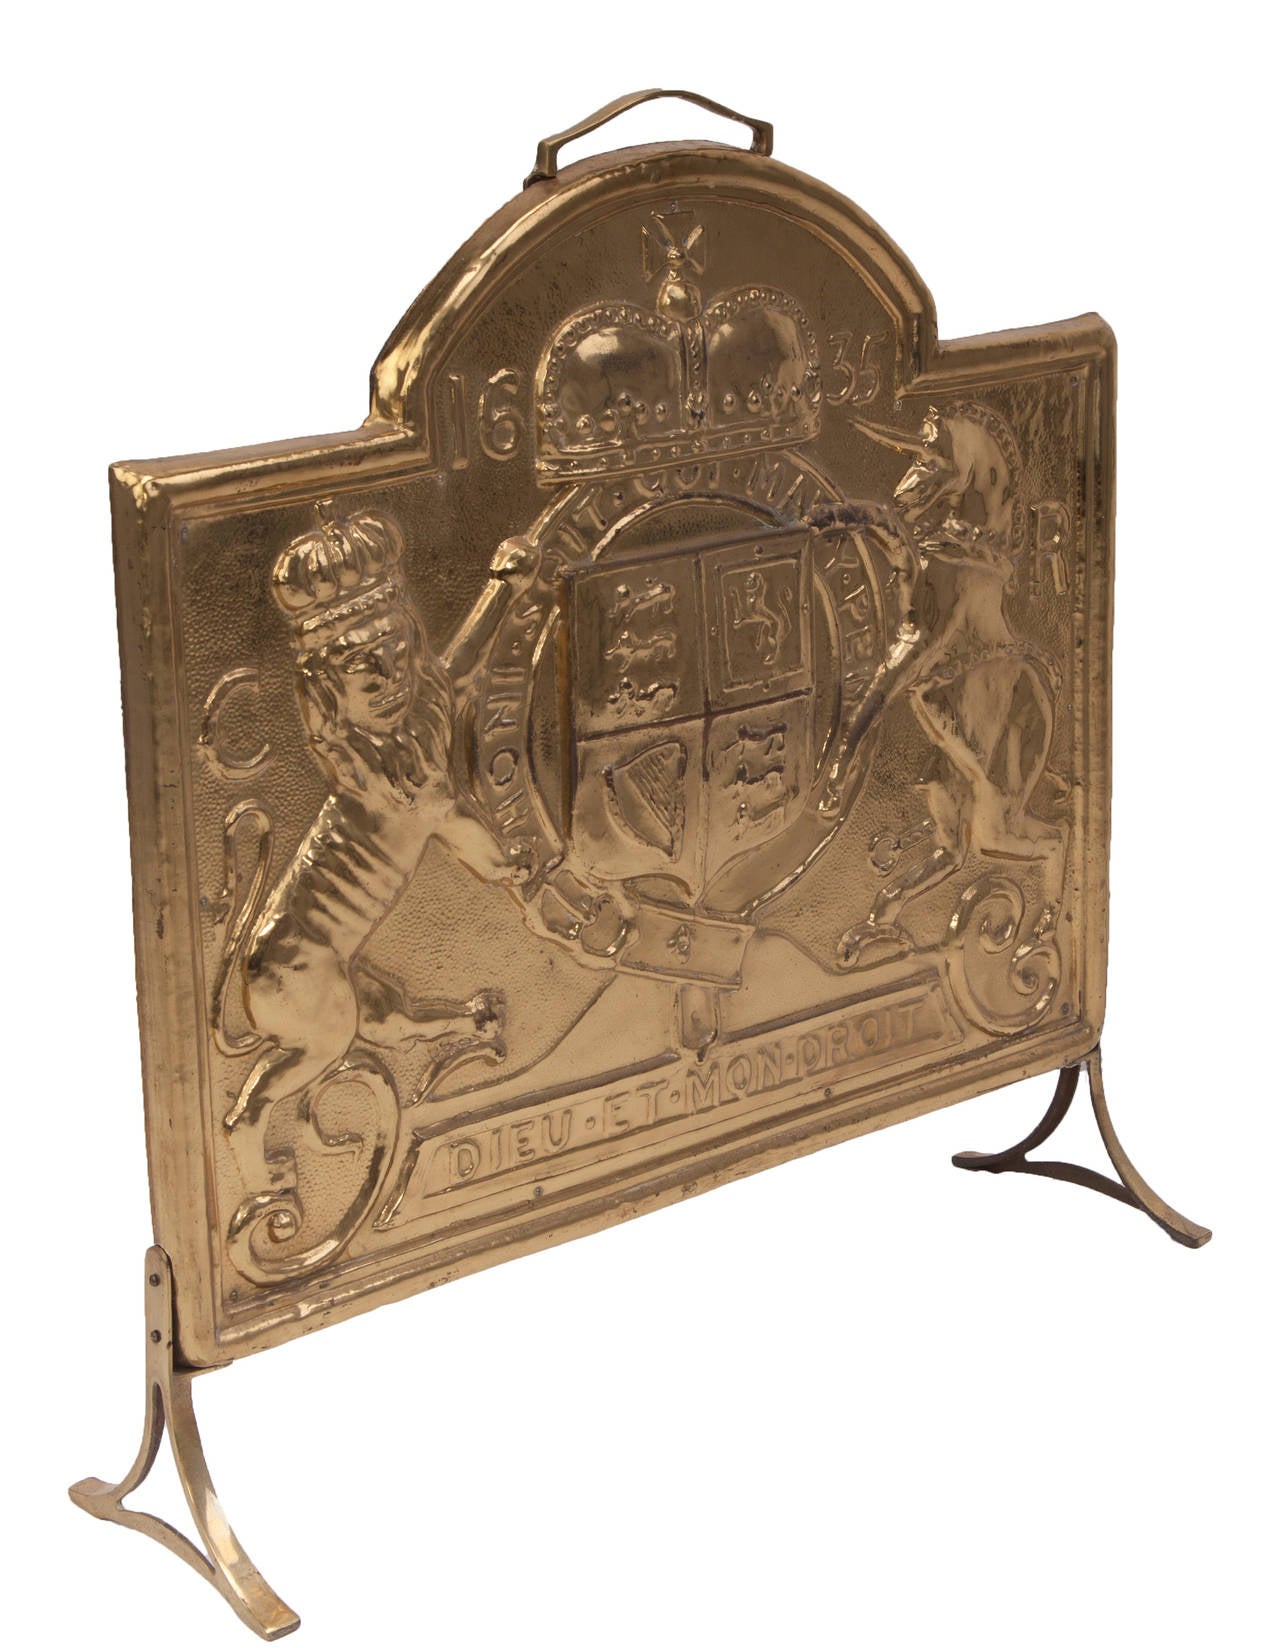 Antiqued Brass Fireplace Screen Unique British Royal Coat Of Arms Hammered Brass Fire Screen at 1stdibs